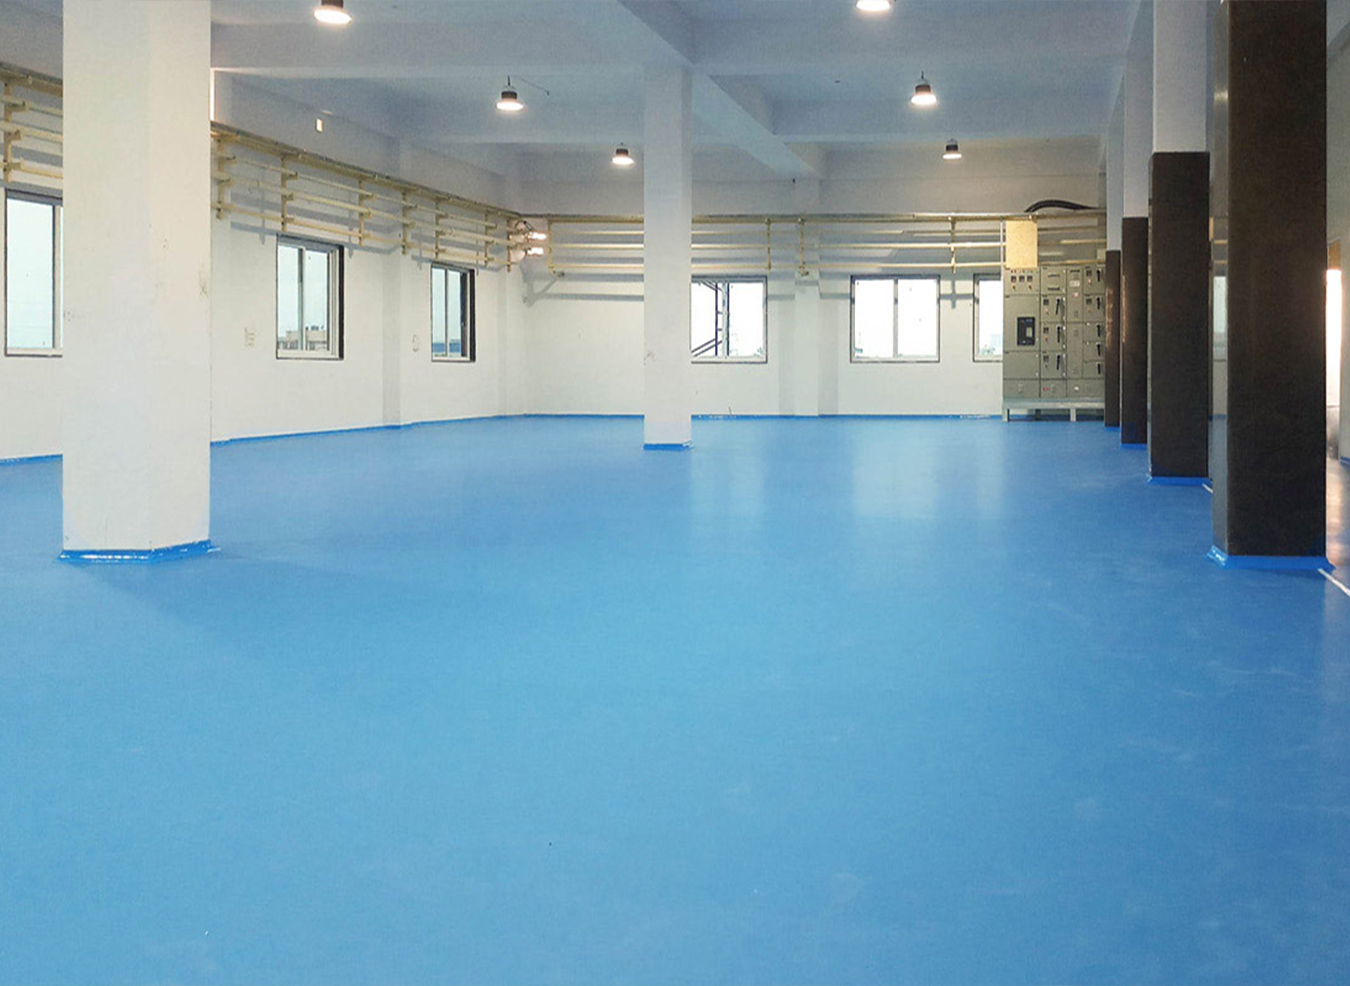 The Advantages of PU Flooring Solution: Durability, Aesthetics, and More